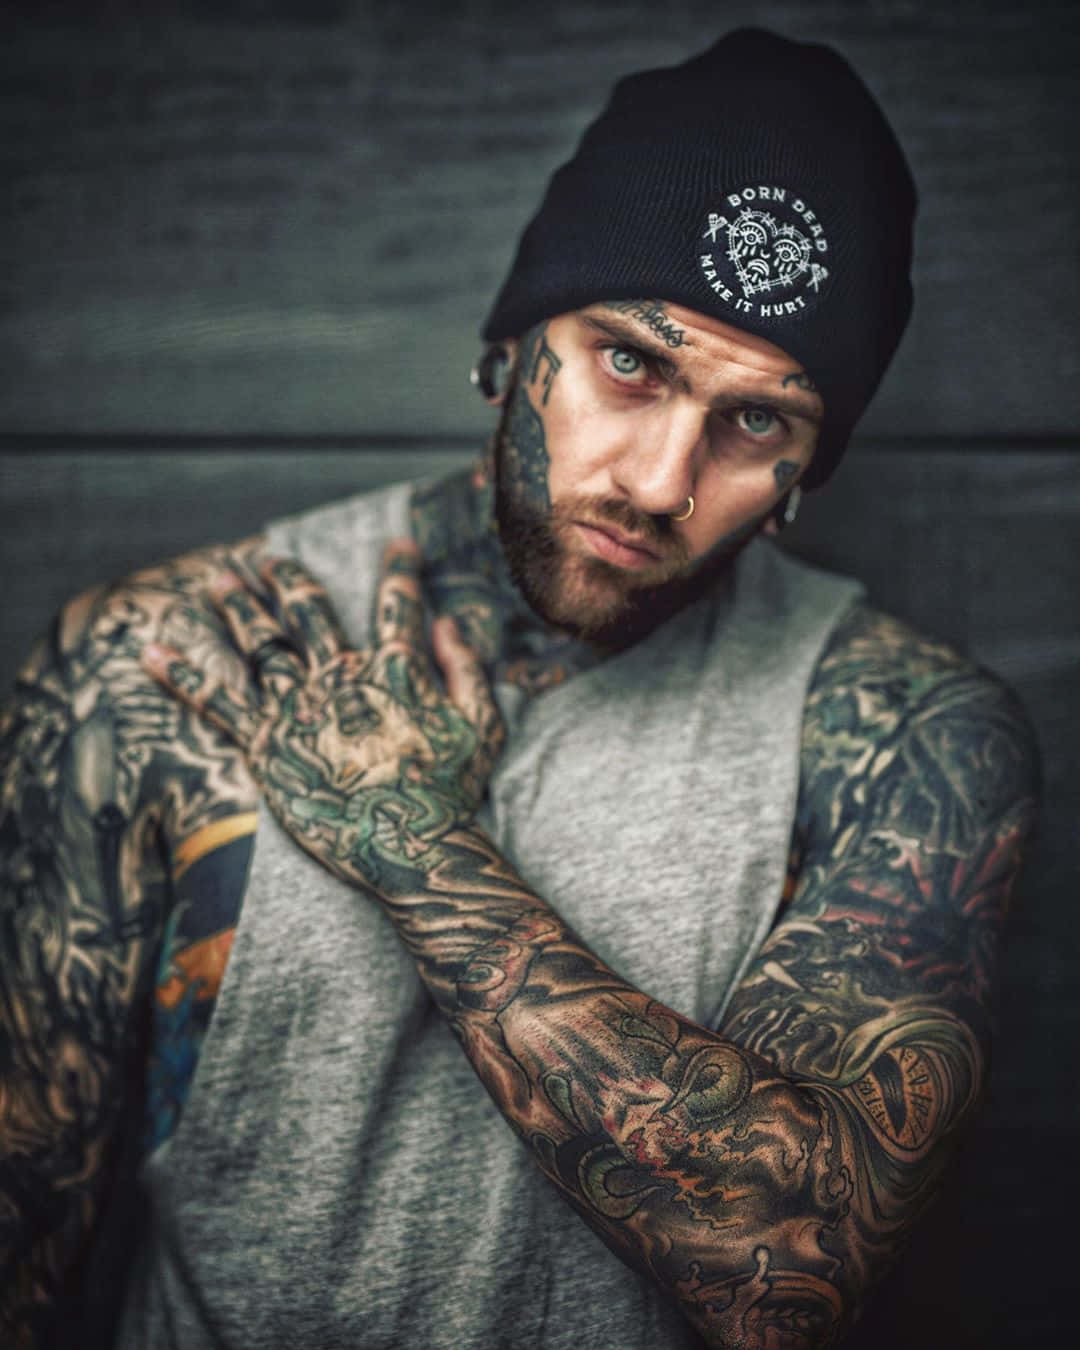 A Man With Tattoos On His Arms And A Beanie